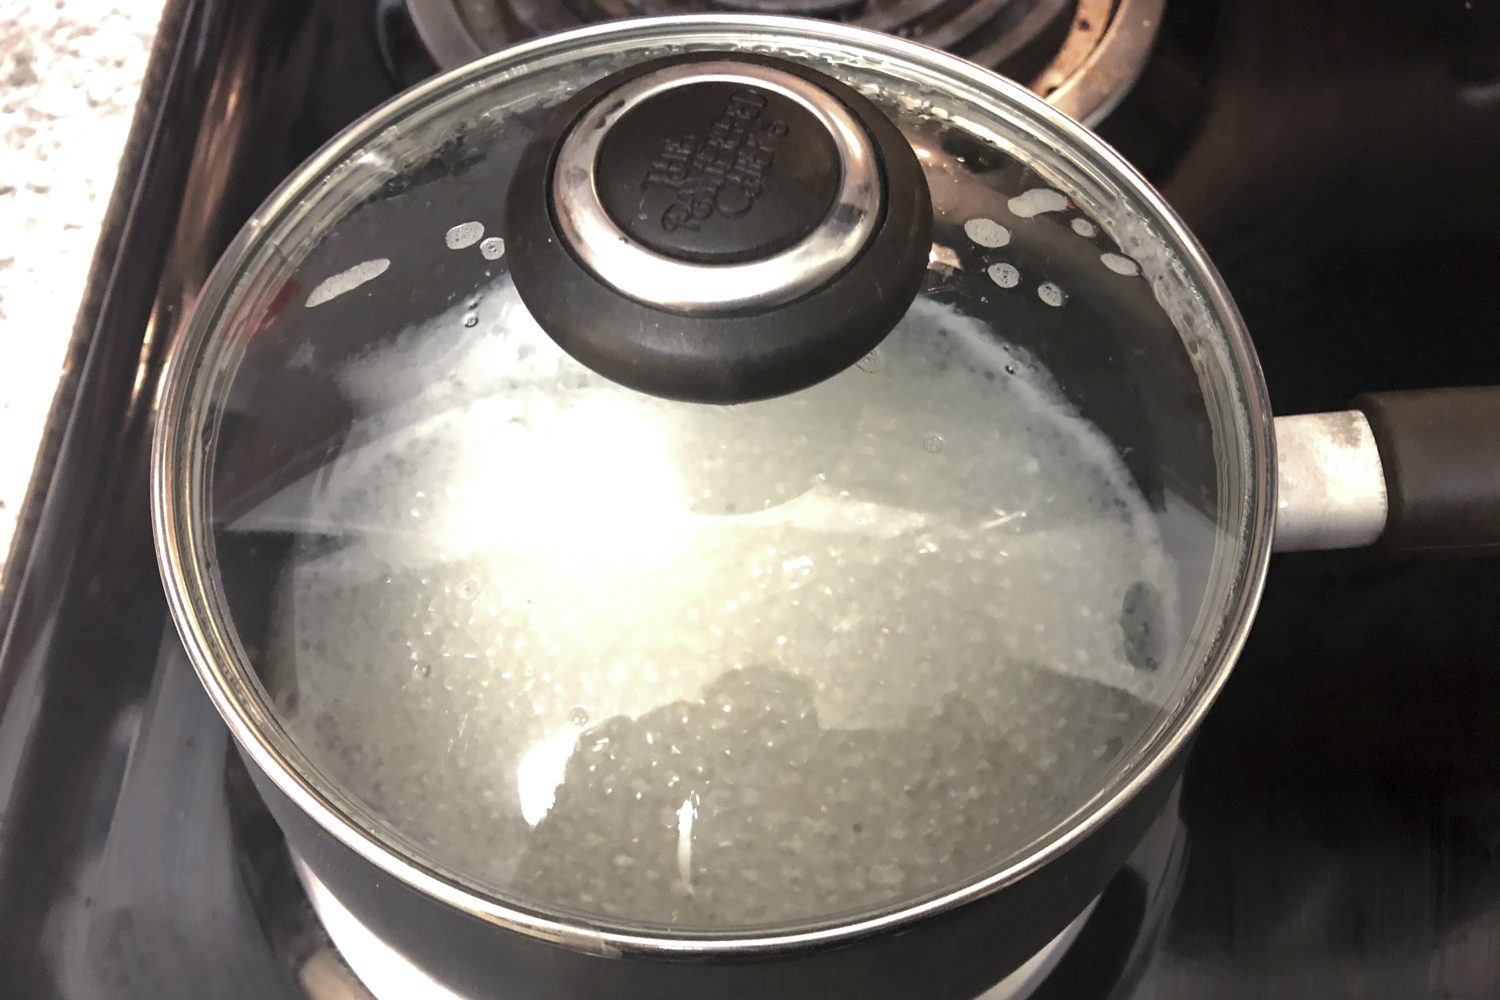 https://www.themanual.com/wp-content/uploads/sites/9/2018/10/how-to-cook-white-rice-7.jpg?fit=1500%2C1000&p=1